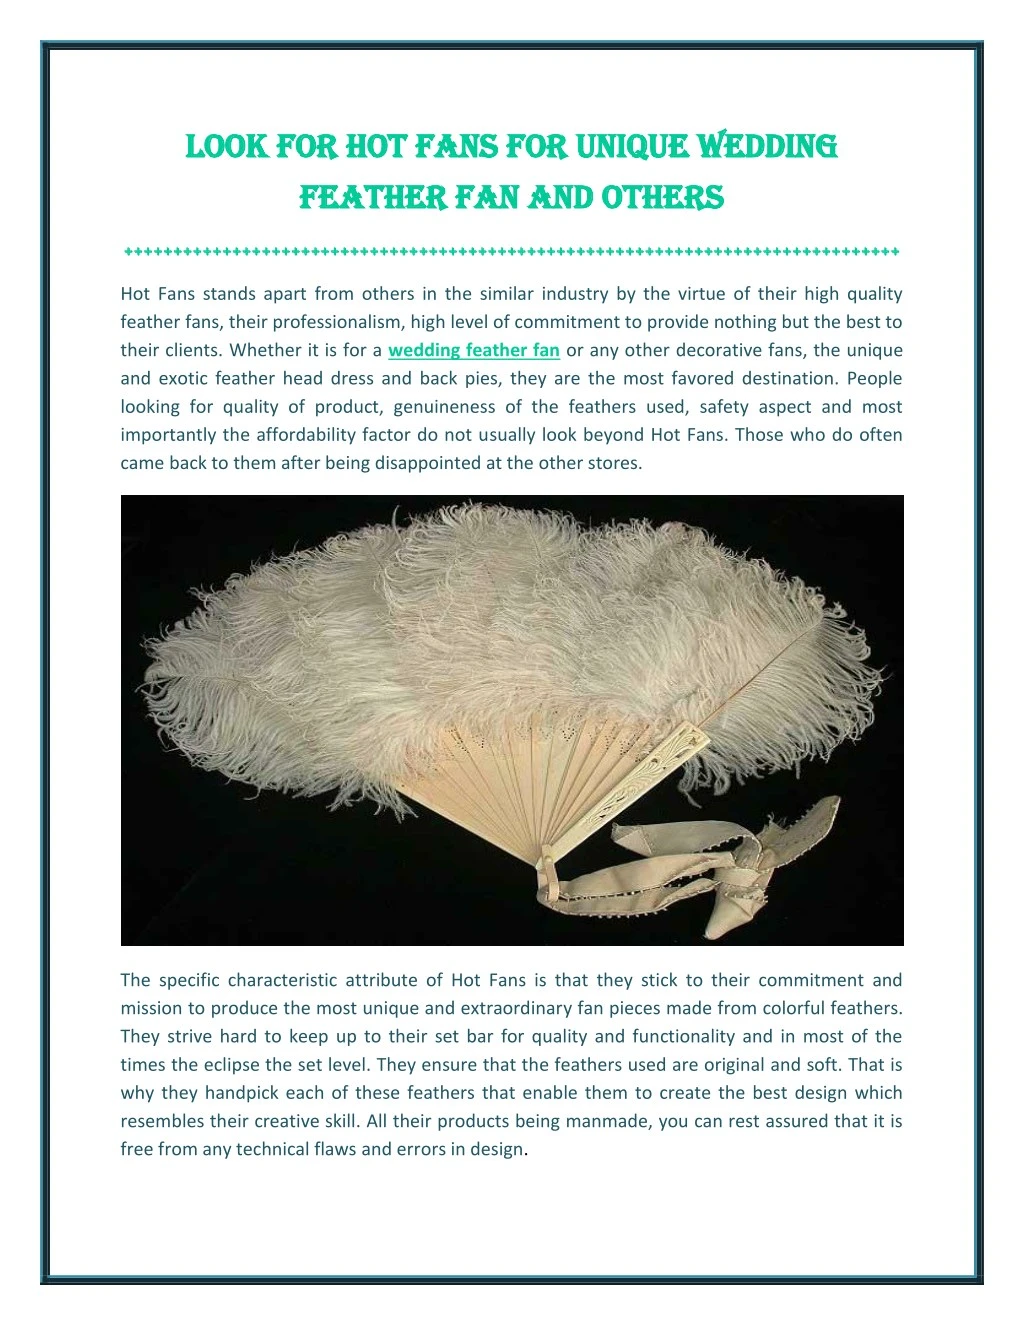 look for hot fans look for hot fans for feather